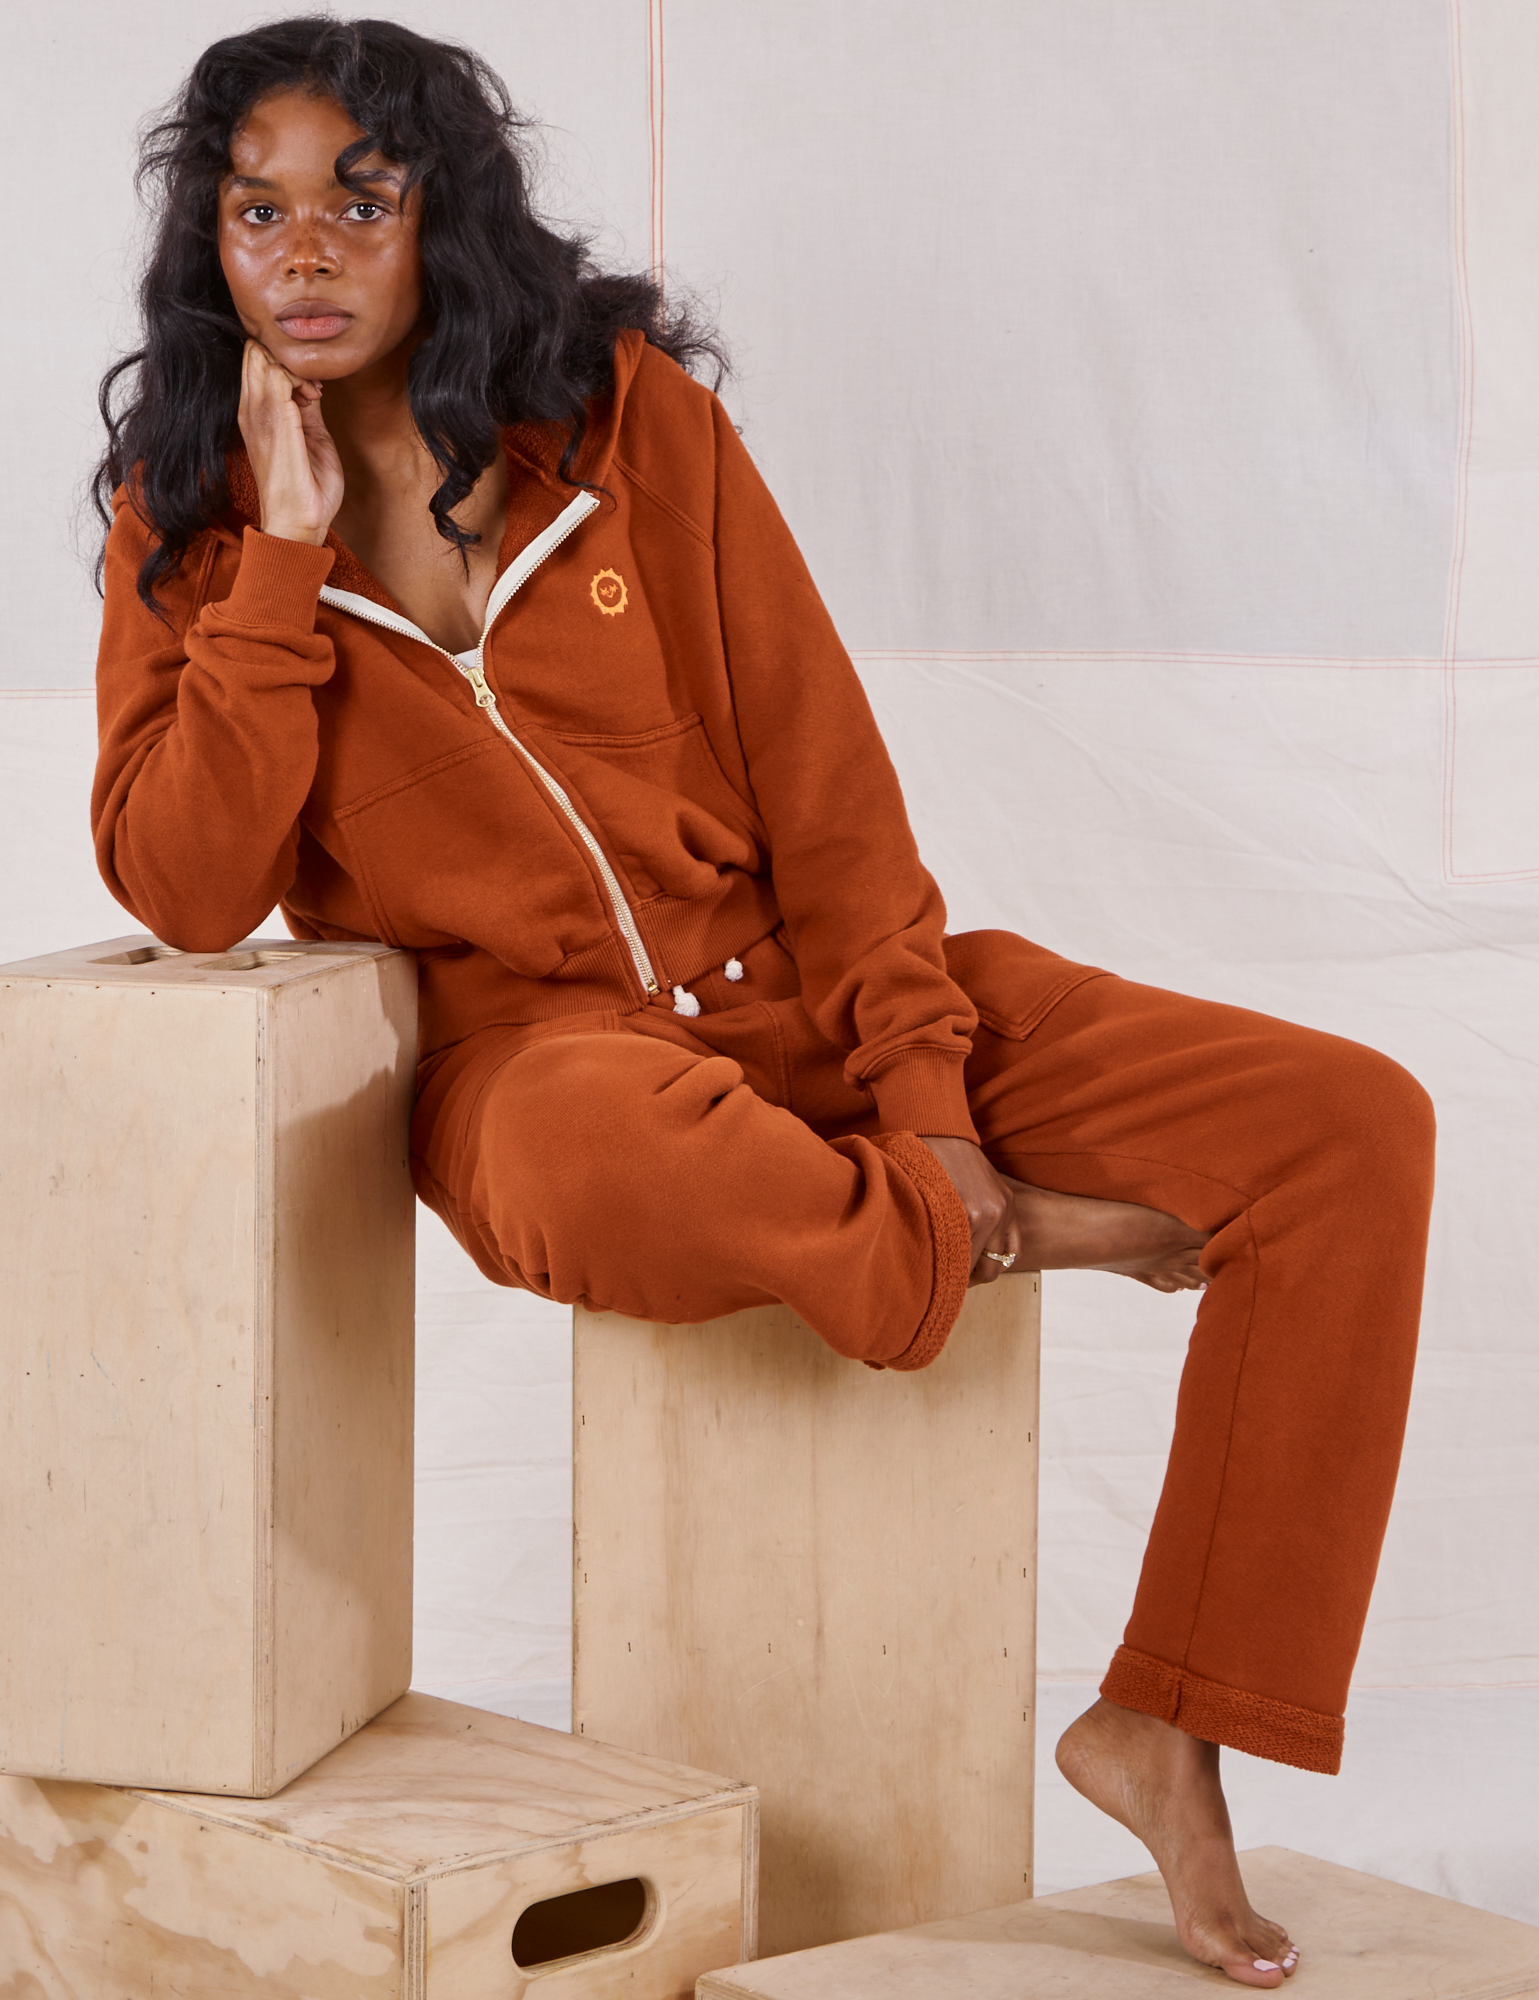 Kandia is wearing Rolled Cuff Sweat Pants in Burnt Terracotta and matching Cropped Zip Hoodies